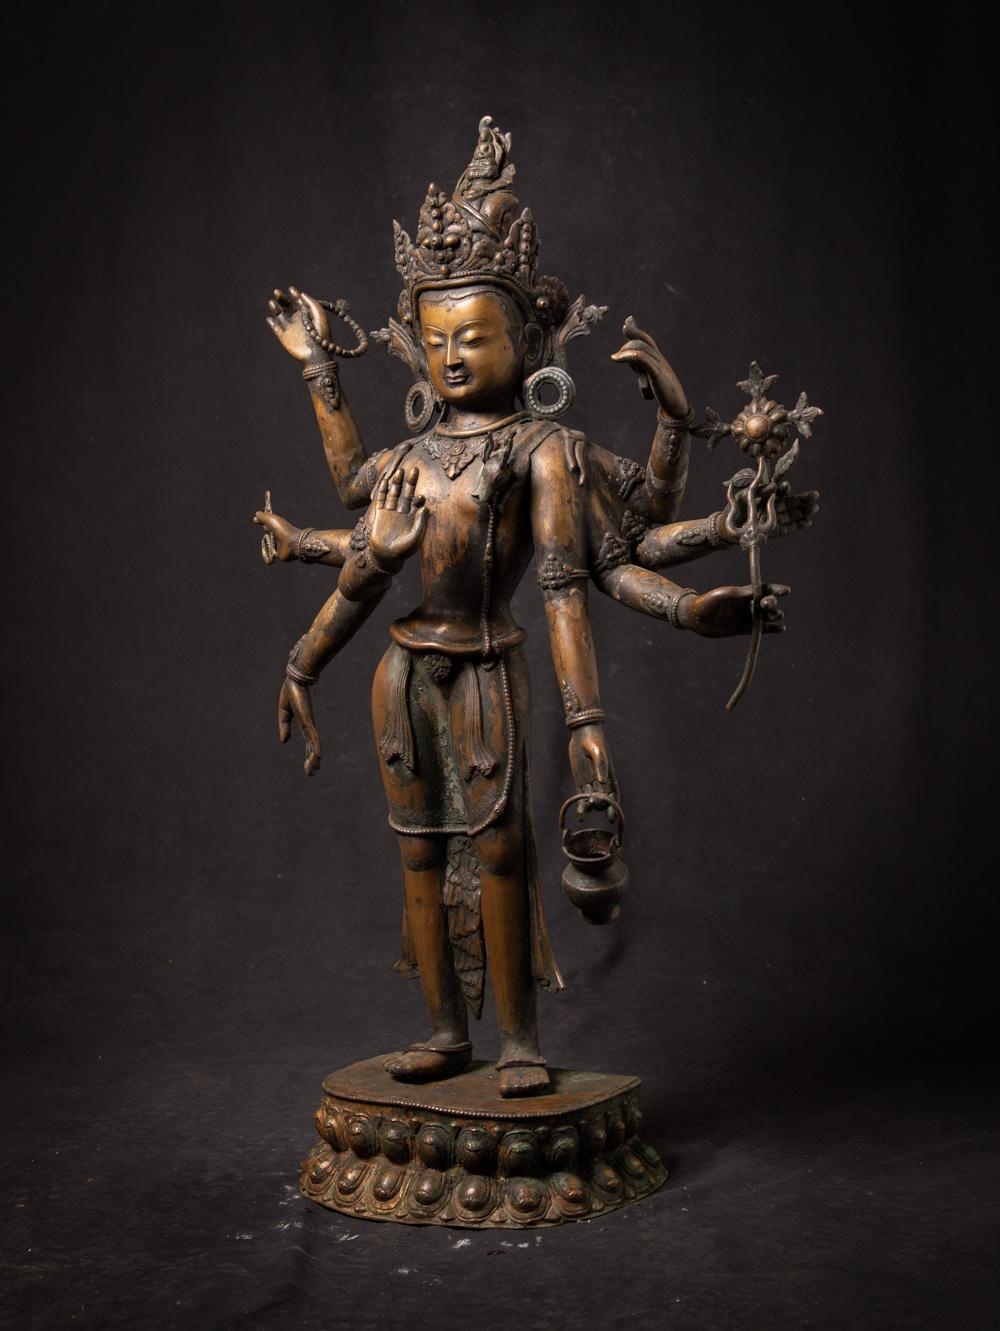 The old bronze Nepali Bodhisattva statue is a truly exceptional and sacred artifact originating from Nepal. Crafted from bronze, this Bodhisattva statue stands at an impressive height of 85 cm and measures 54.5 cm in width and 19 cm in depth. The